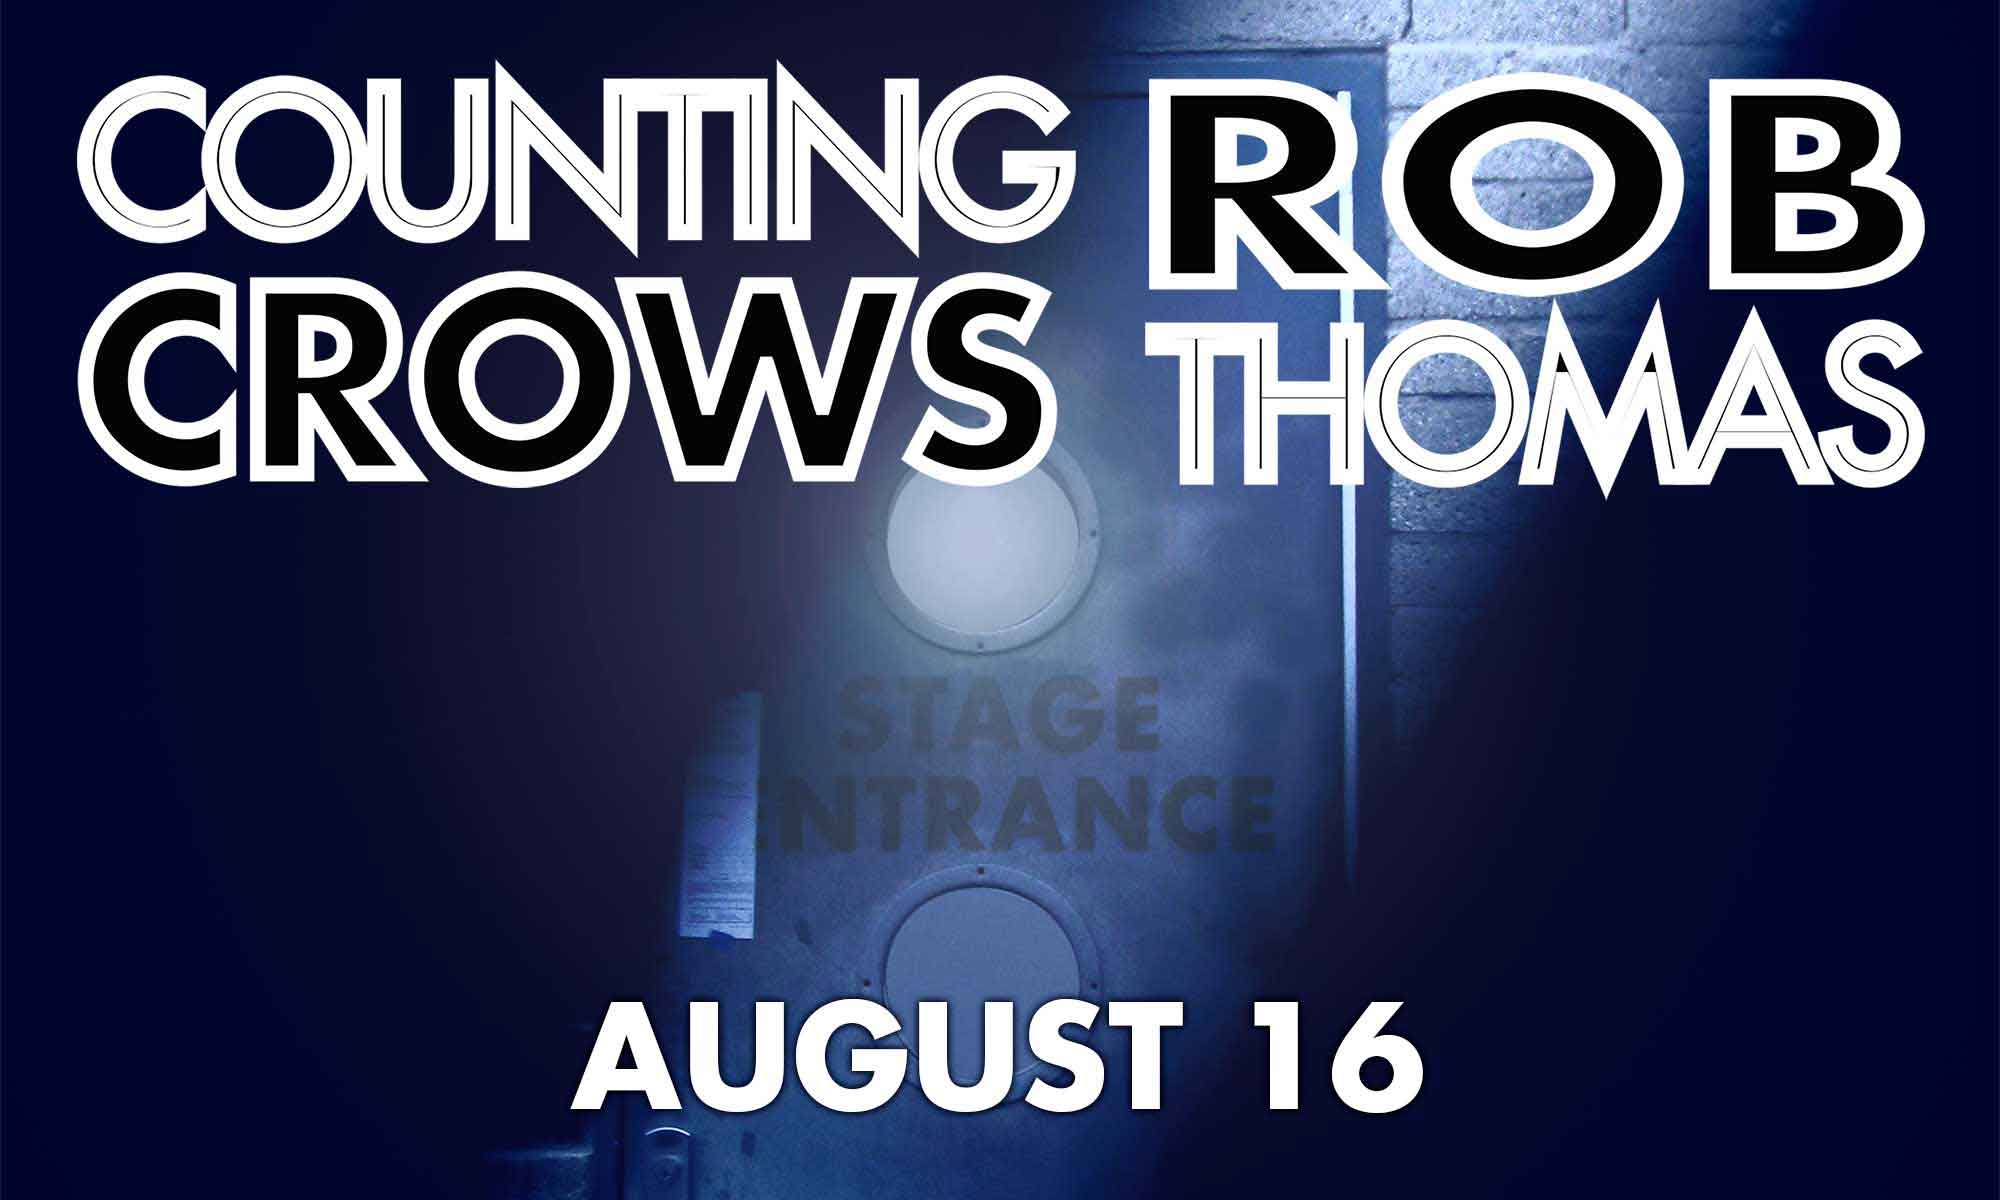 Counting Crows & Rob Thomas at Coney Island Amphitheater on 08-16-16